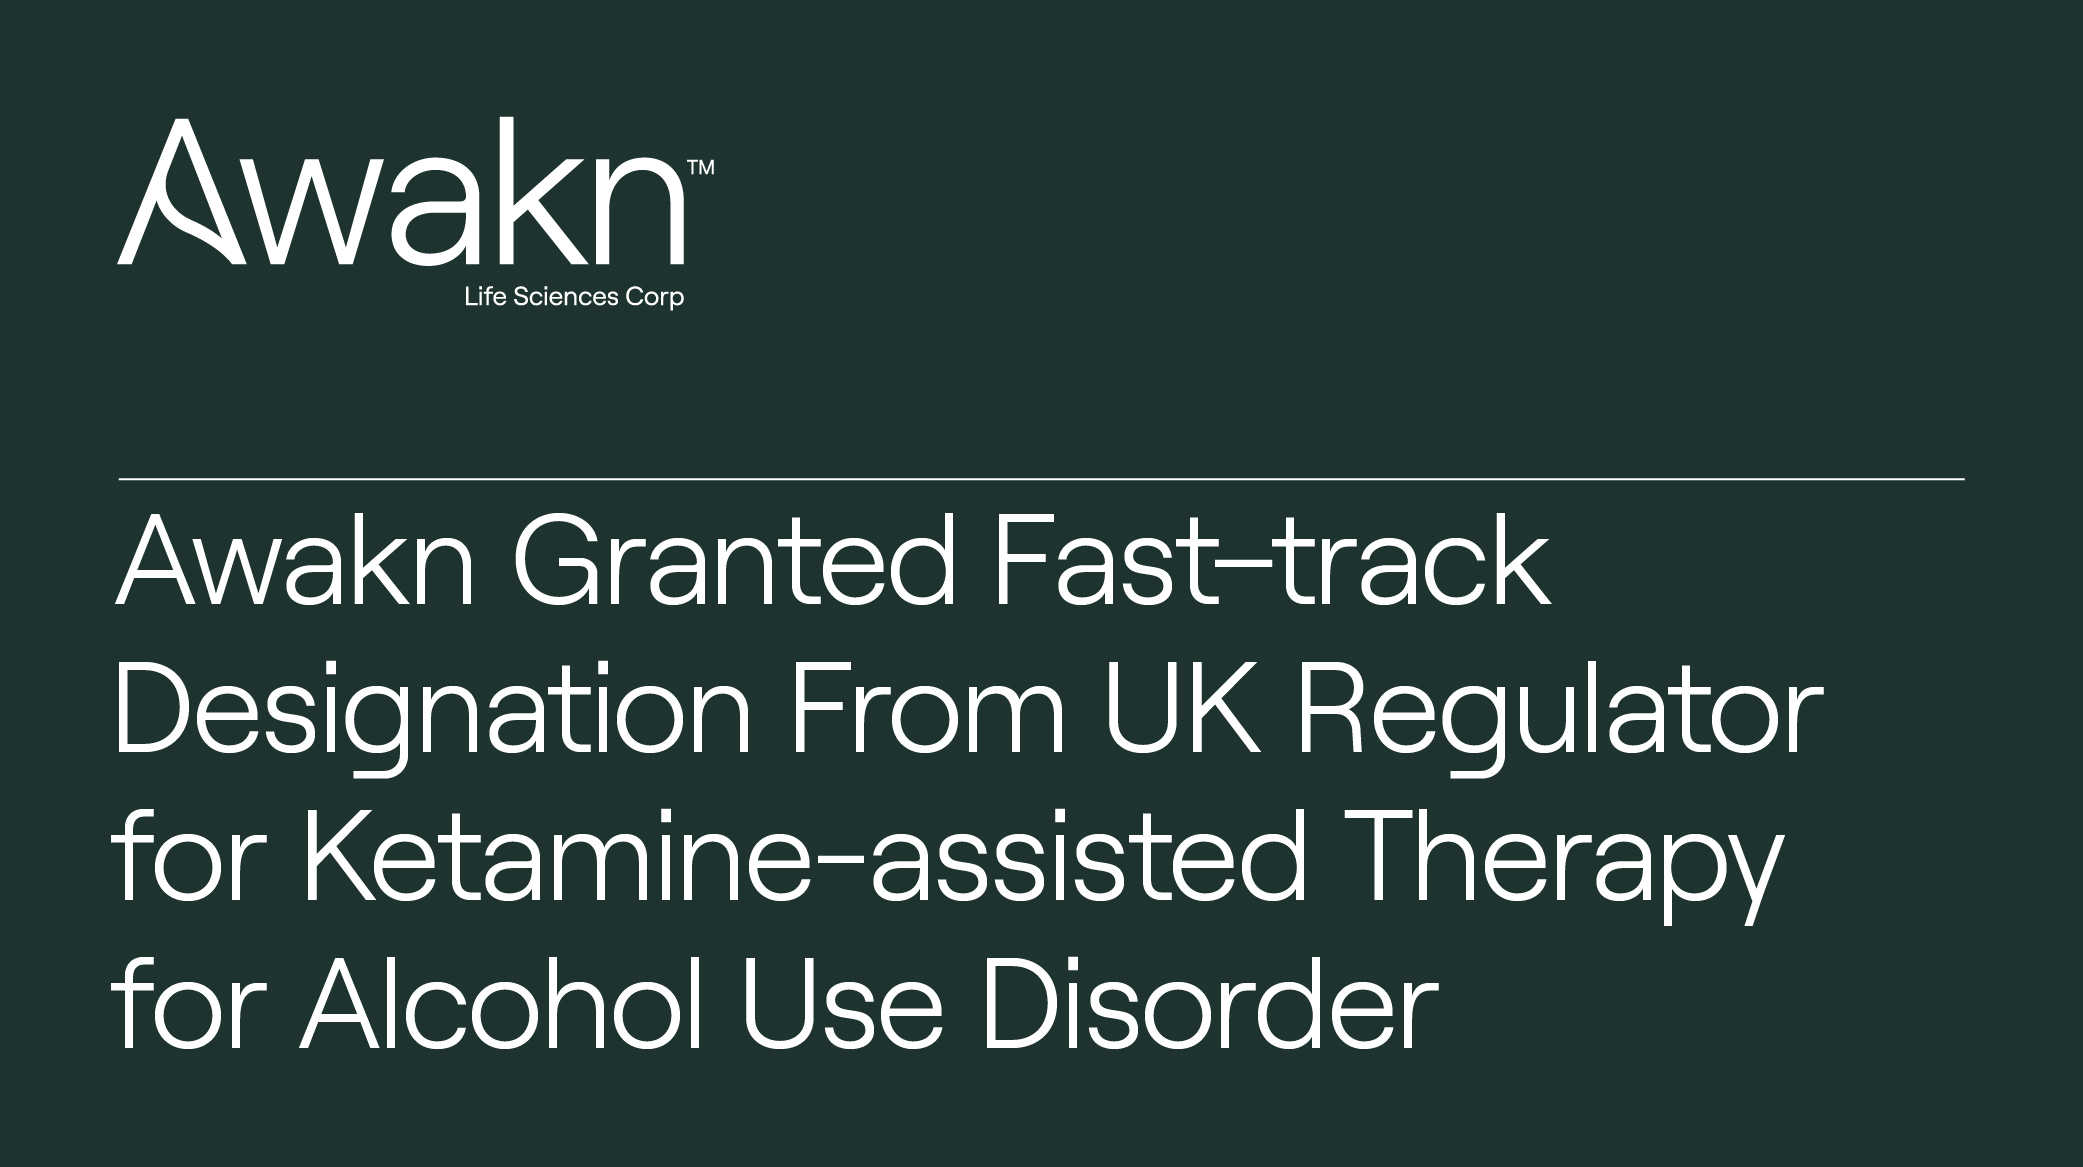 Awakn Life Sciences Granted Fast-Track Designation From UK Regulator For Ketamine-Assisted Therapy For Alcohol Use Disorder